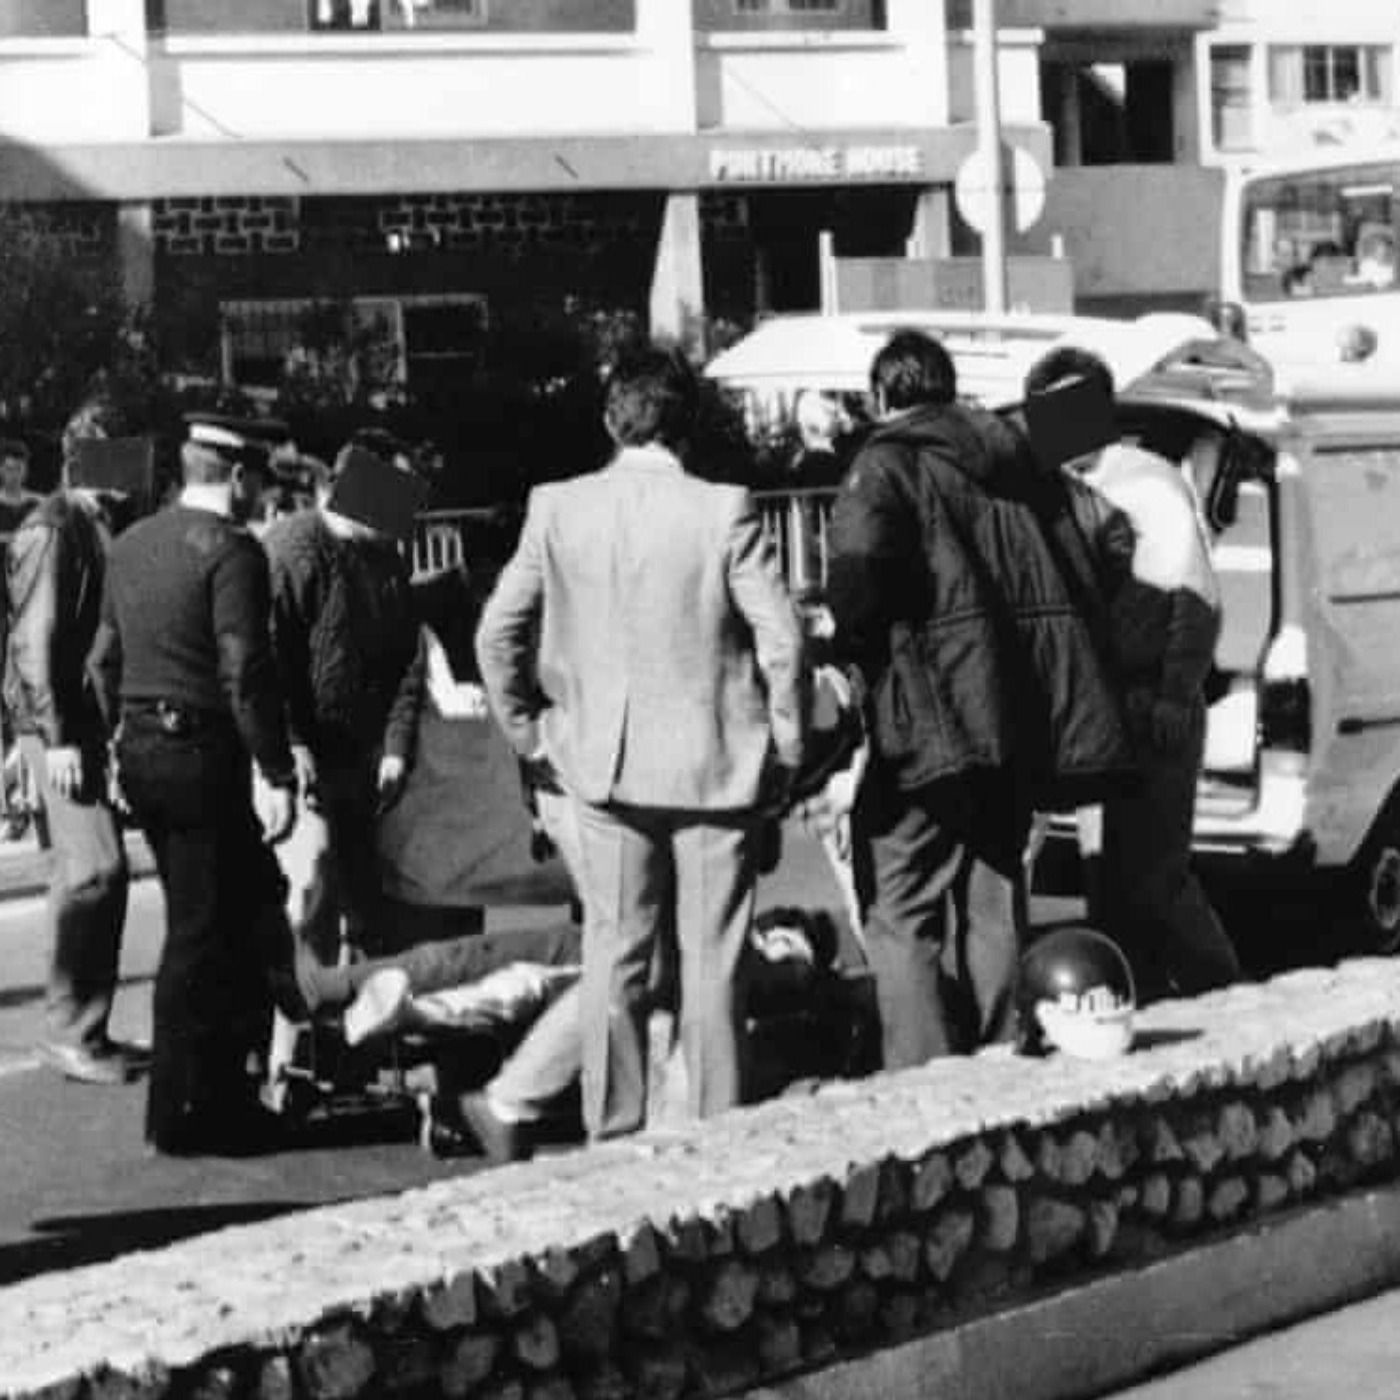 The Gibraltar Shooting, Milltown Cemetery Attack and Corporal Killings